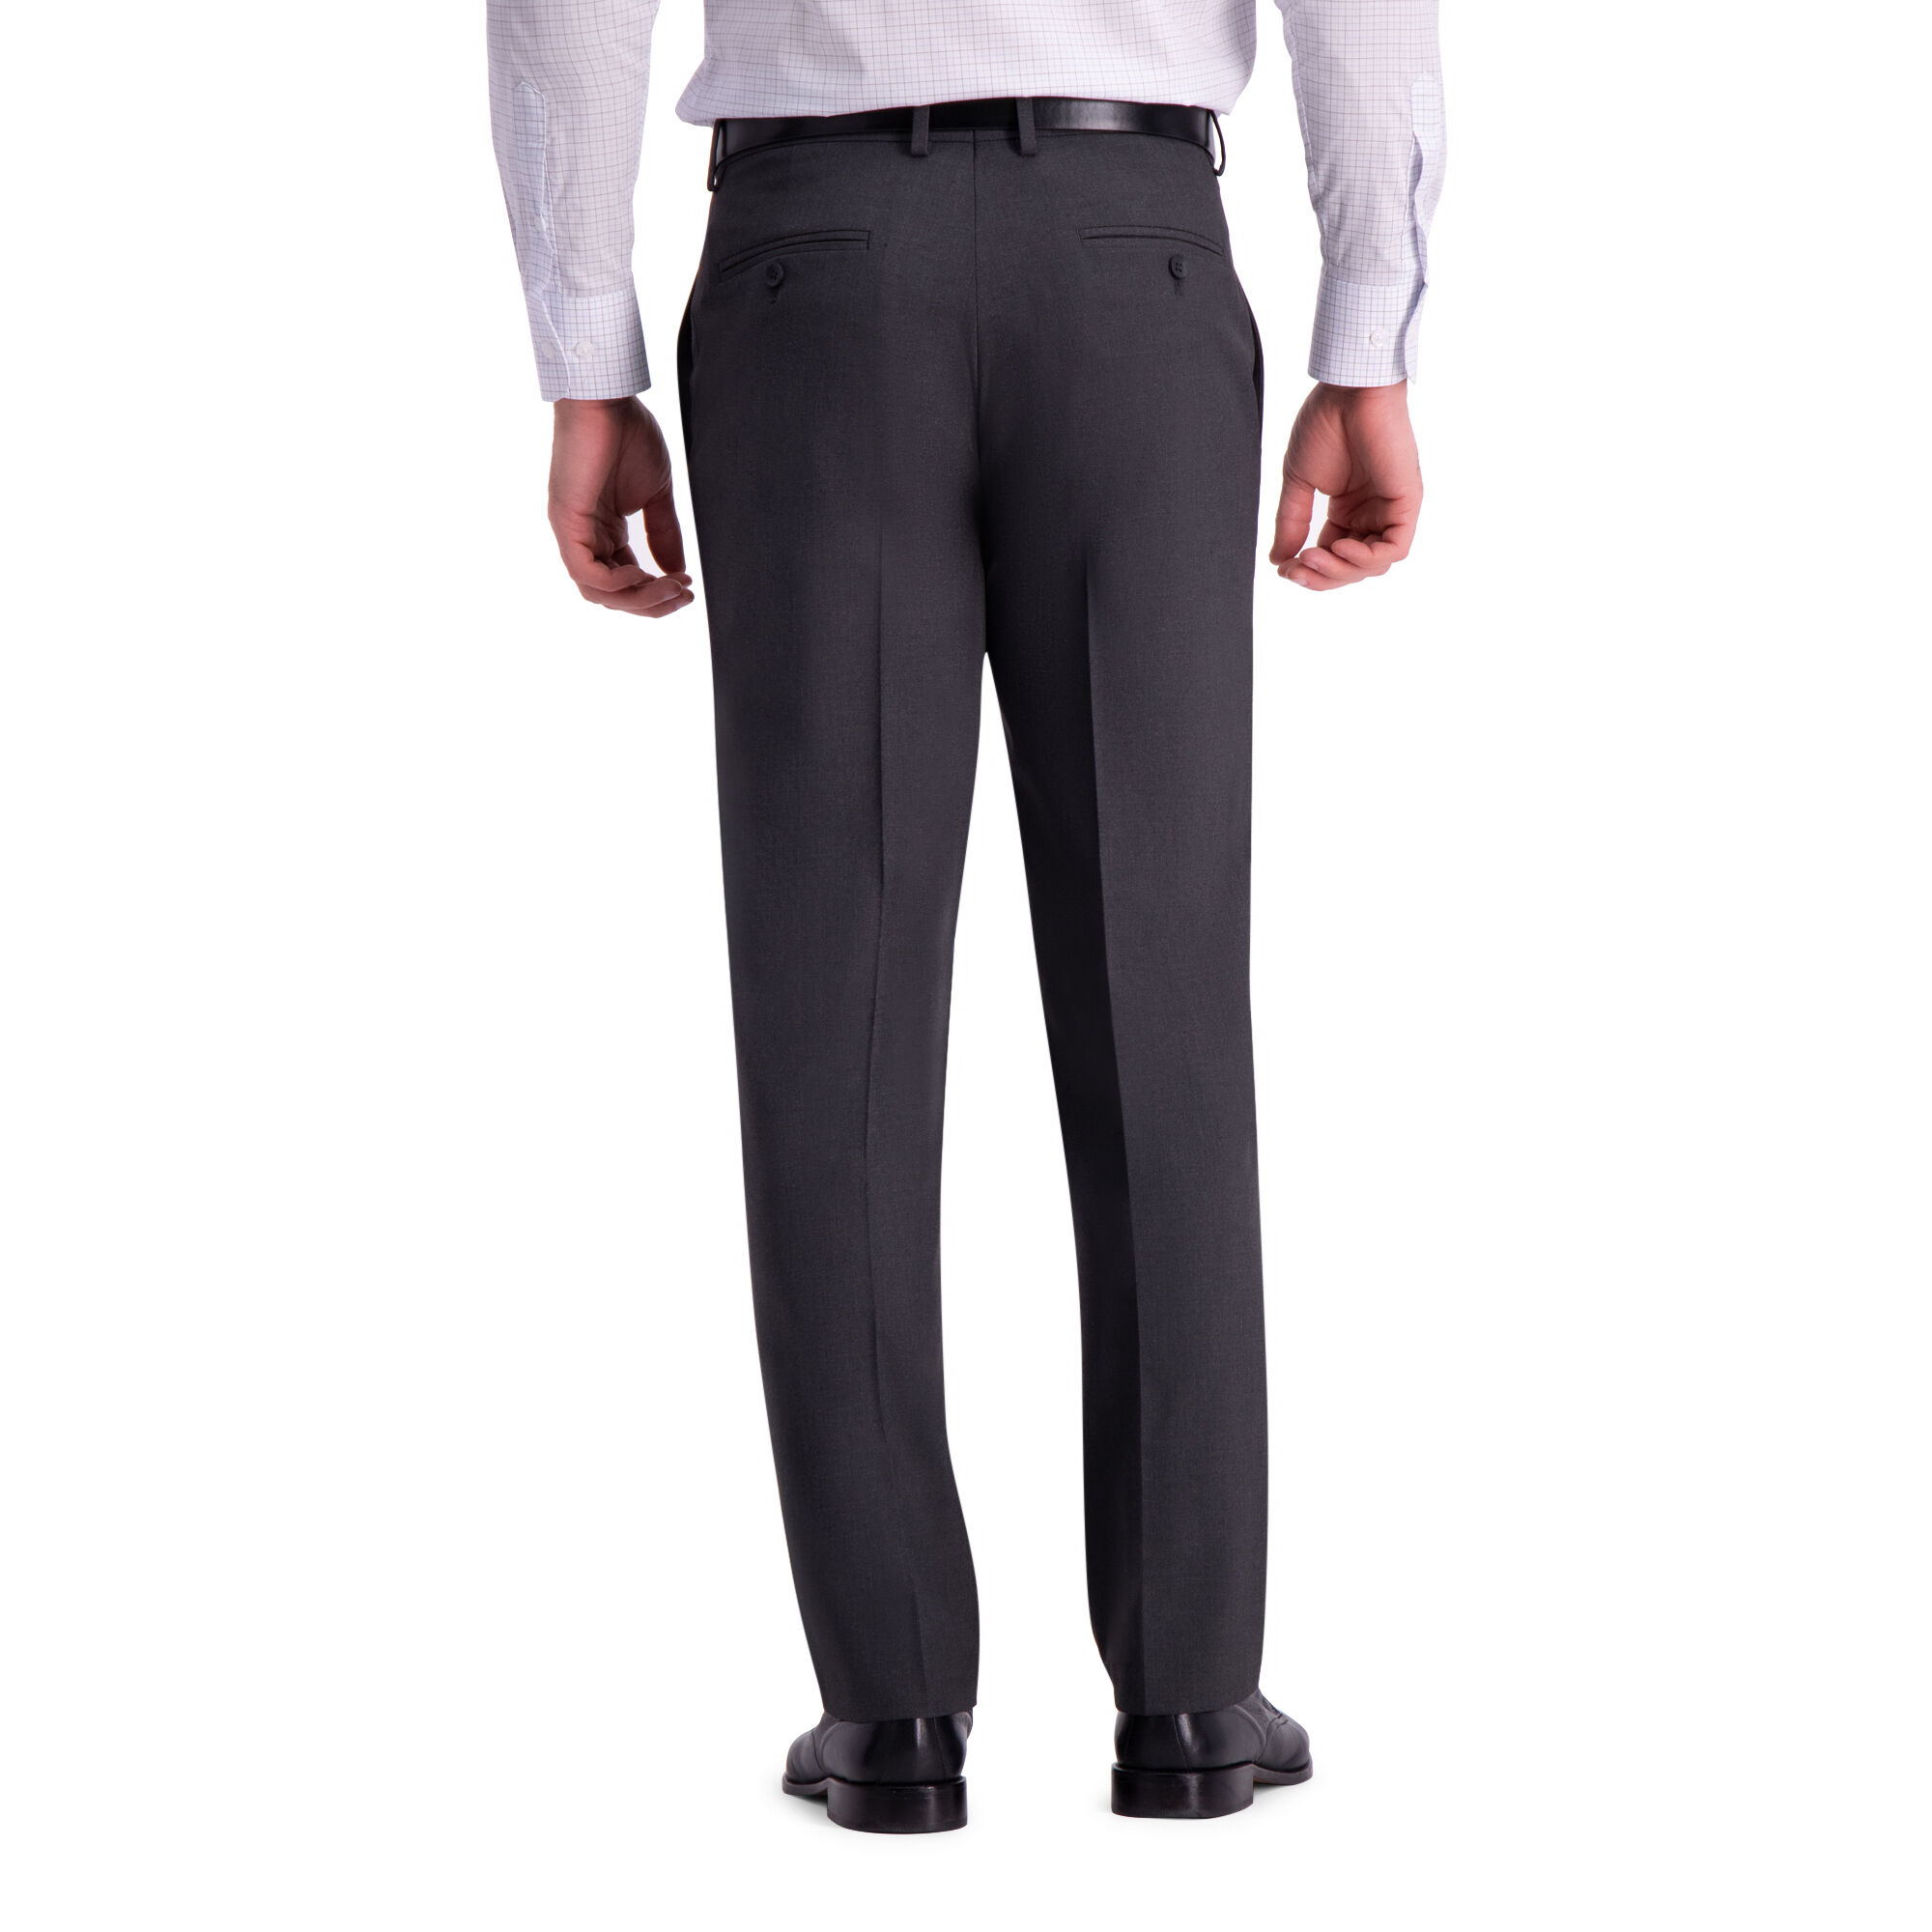 J.M. Haggar 4-Way Stretch Suit Pant, Charcoal Heather view# 3